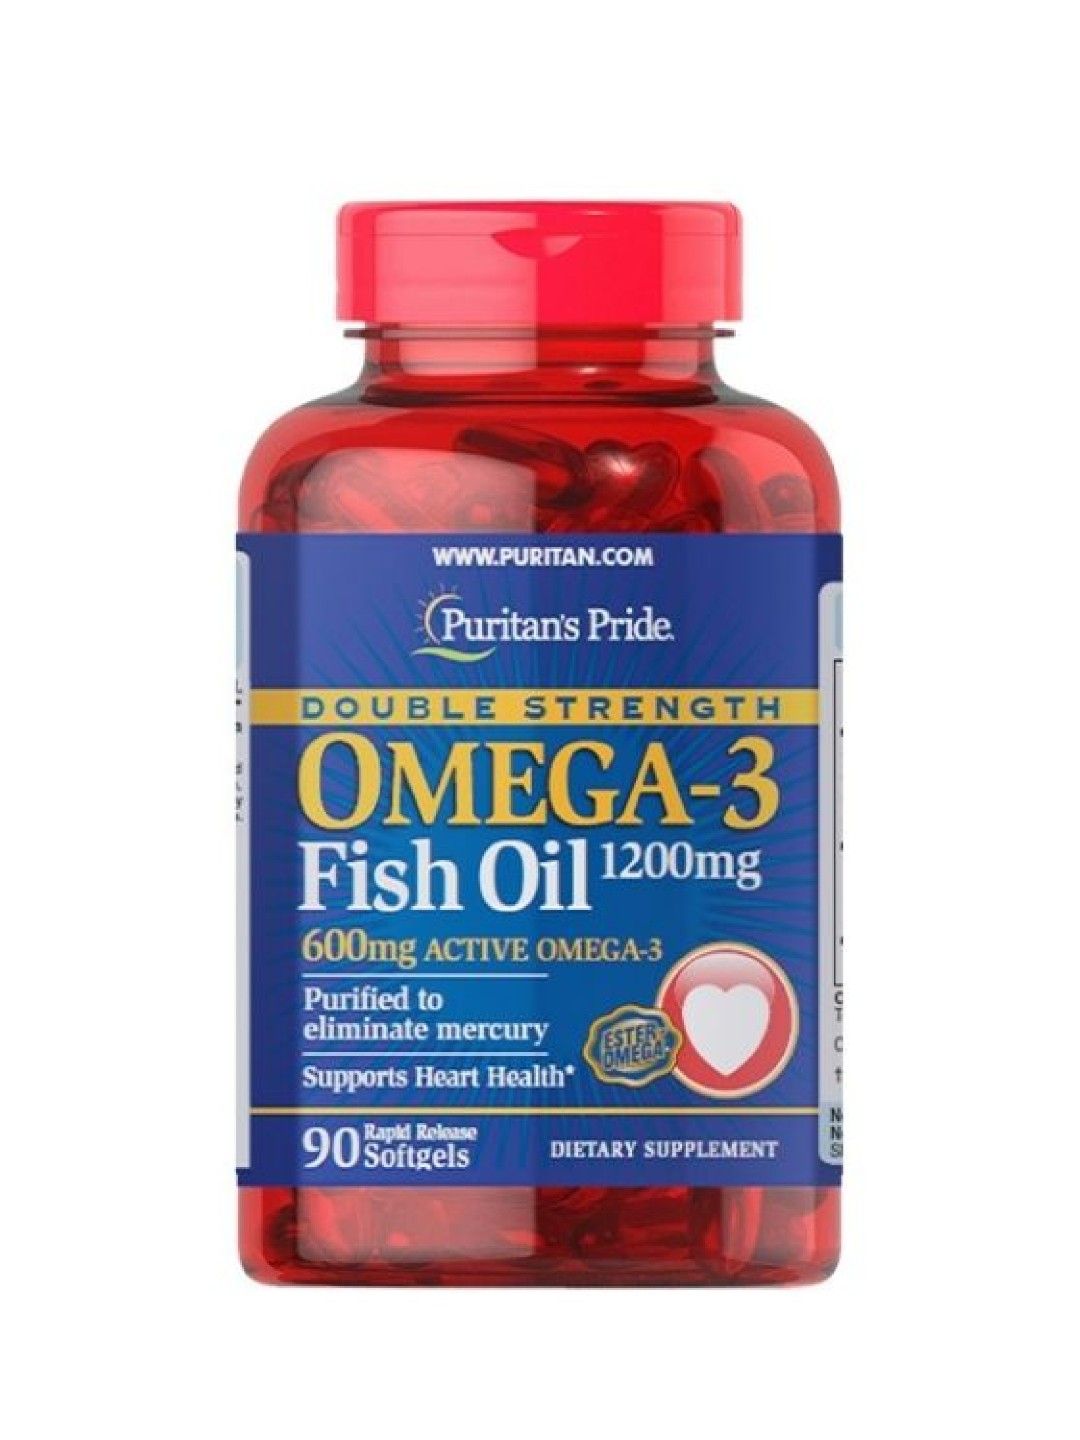 Puritan's Pride Fish Oil Omega 3 Double Strength 1200mg (90 softgels)